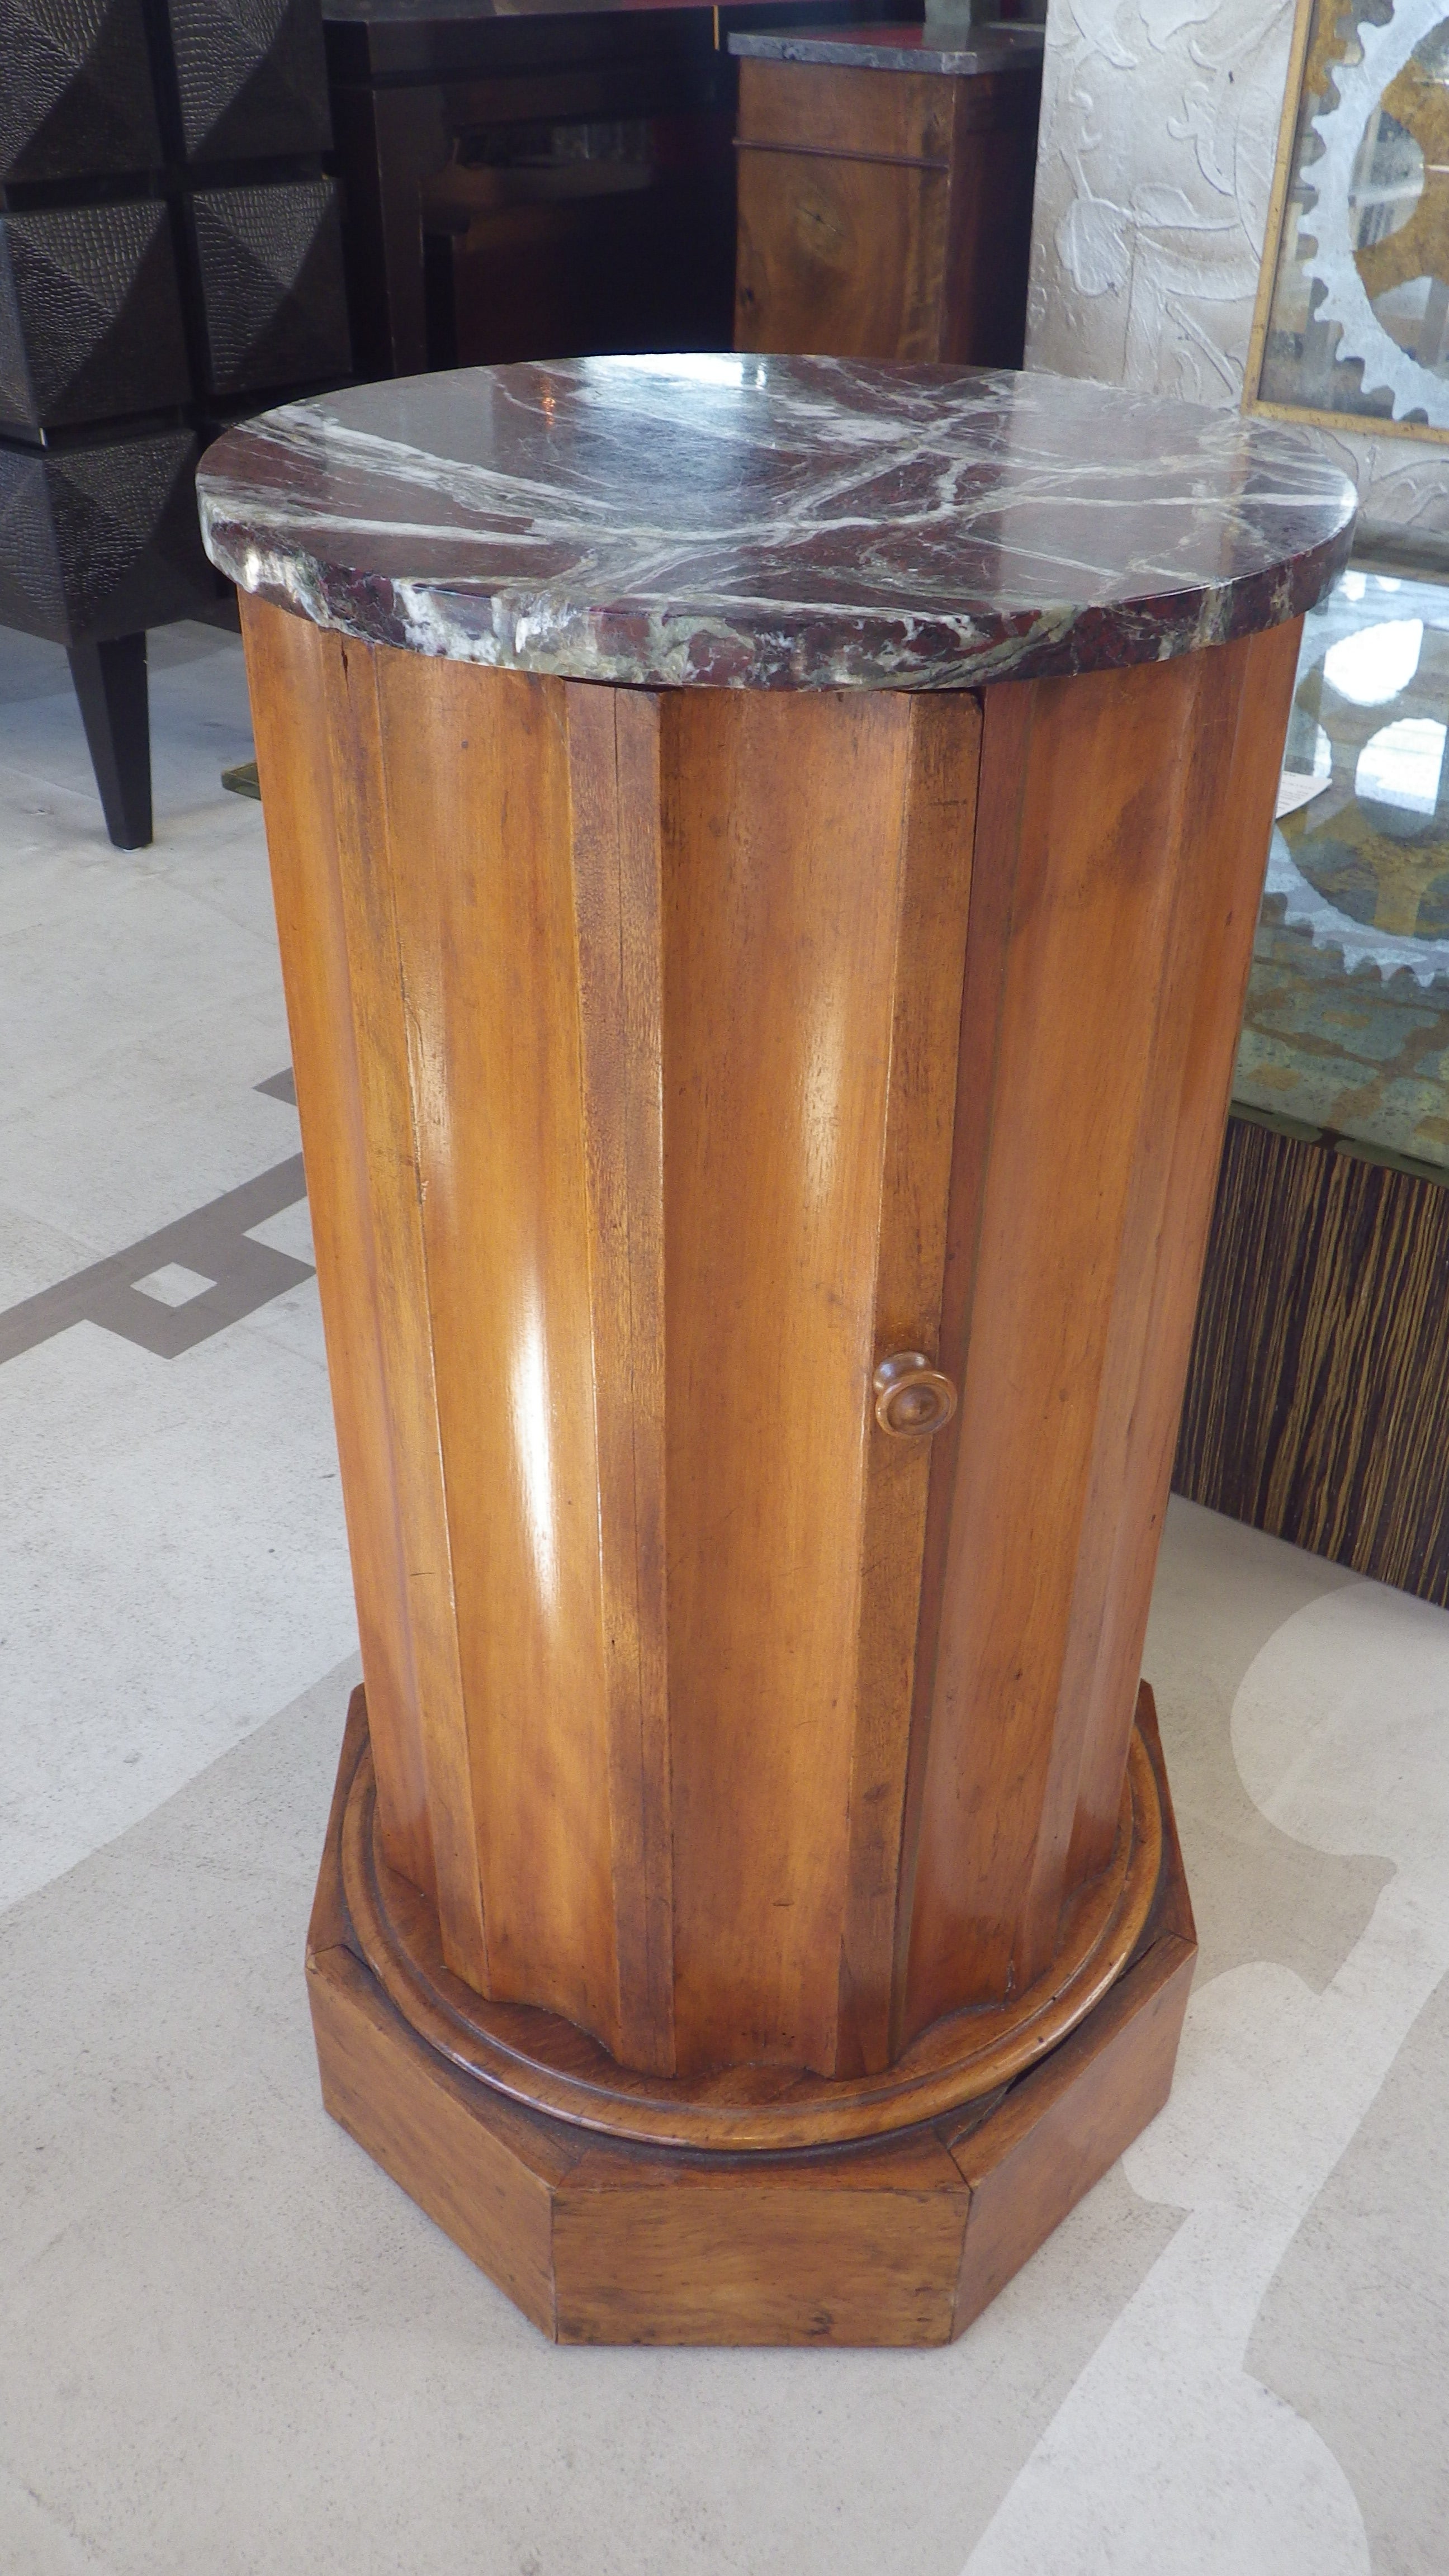 Pedestal Base with Marble Top